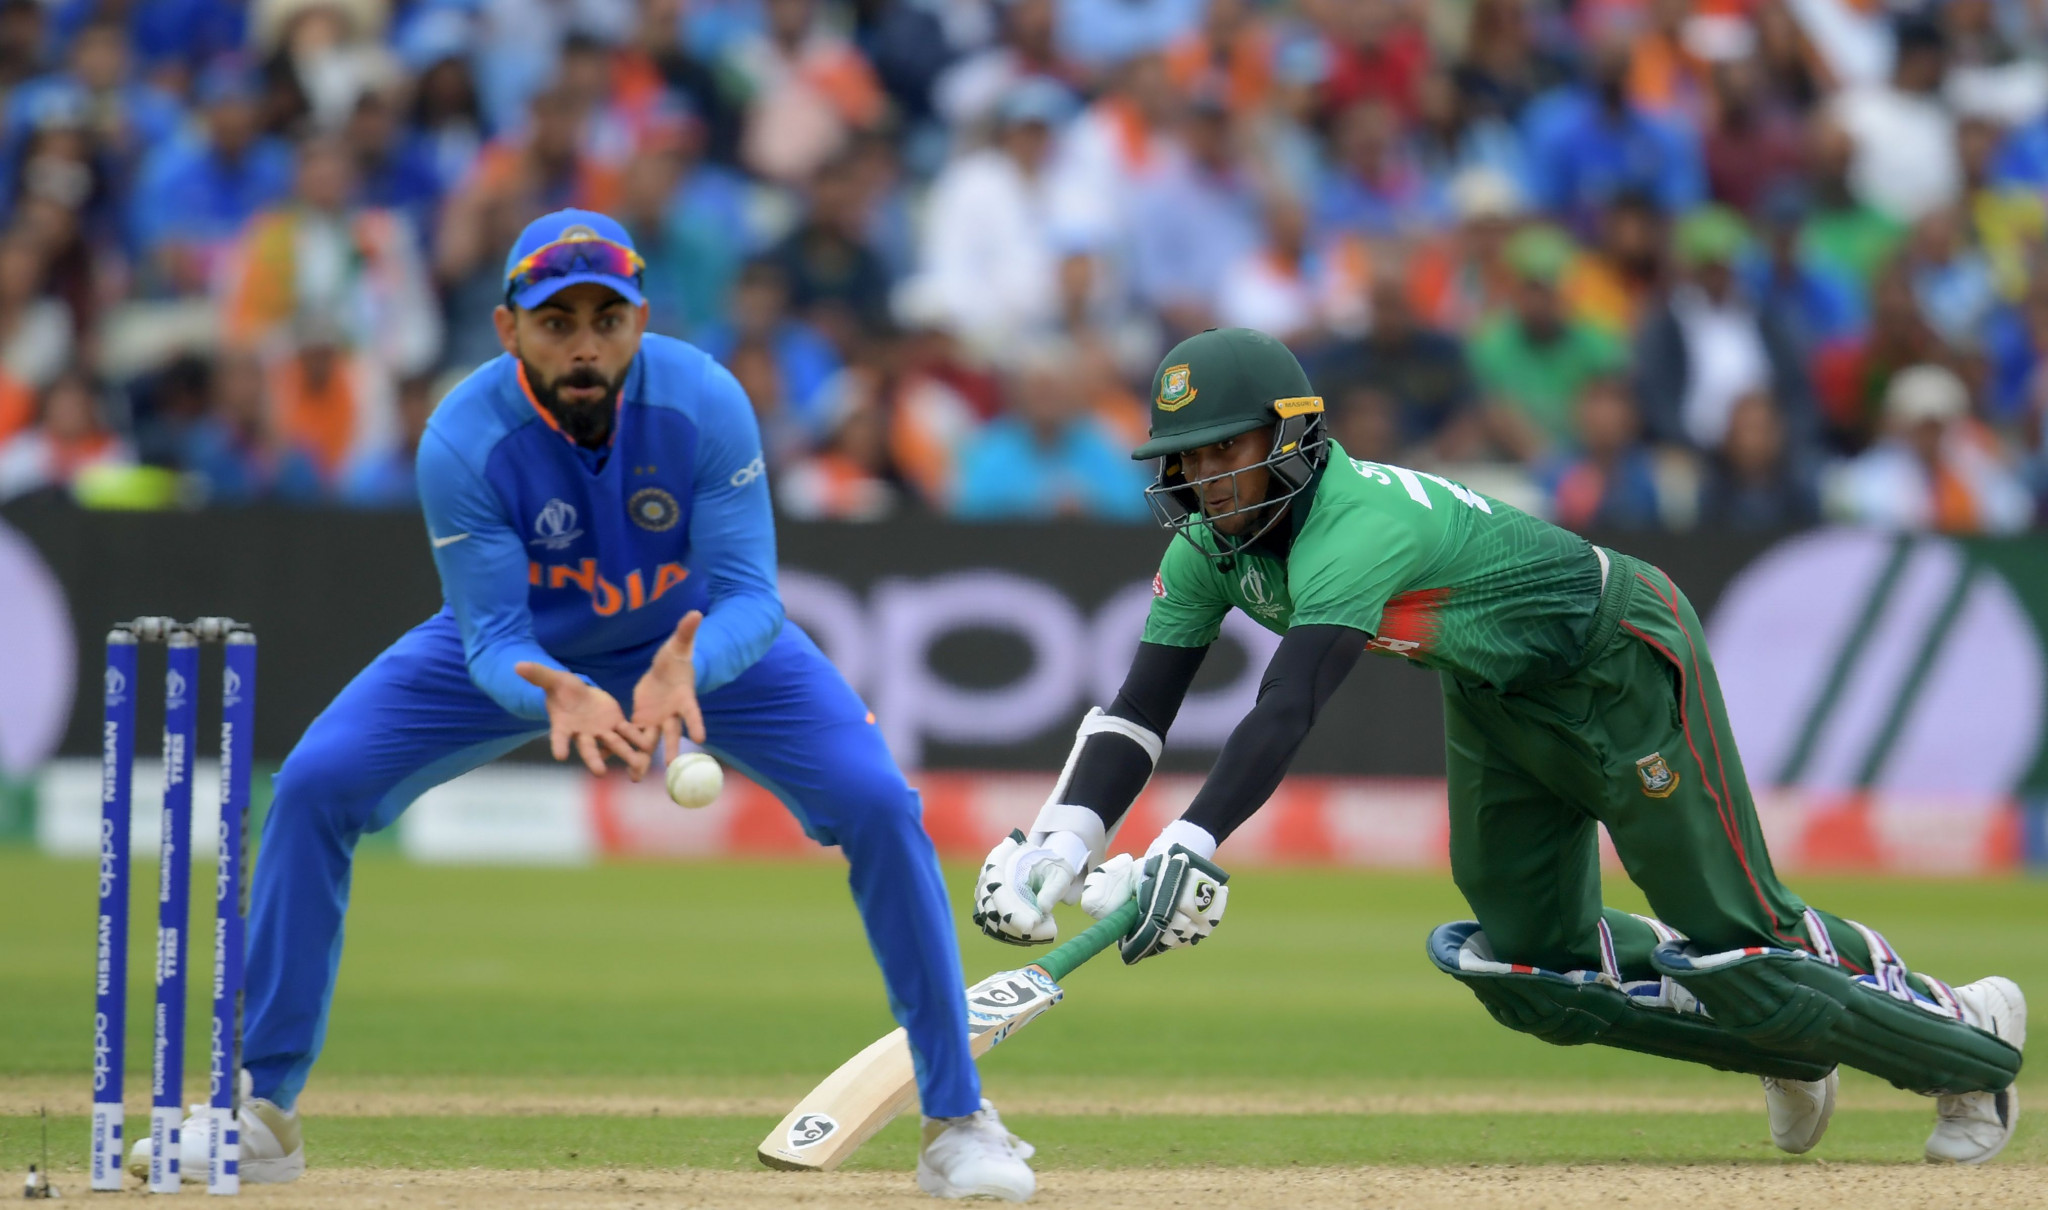 India overcame Bangladesh at Edgbaston to reach the semi-finals of the ICC Cricket World Cup ©Getty Images